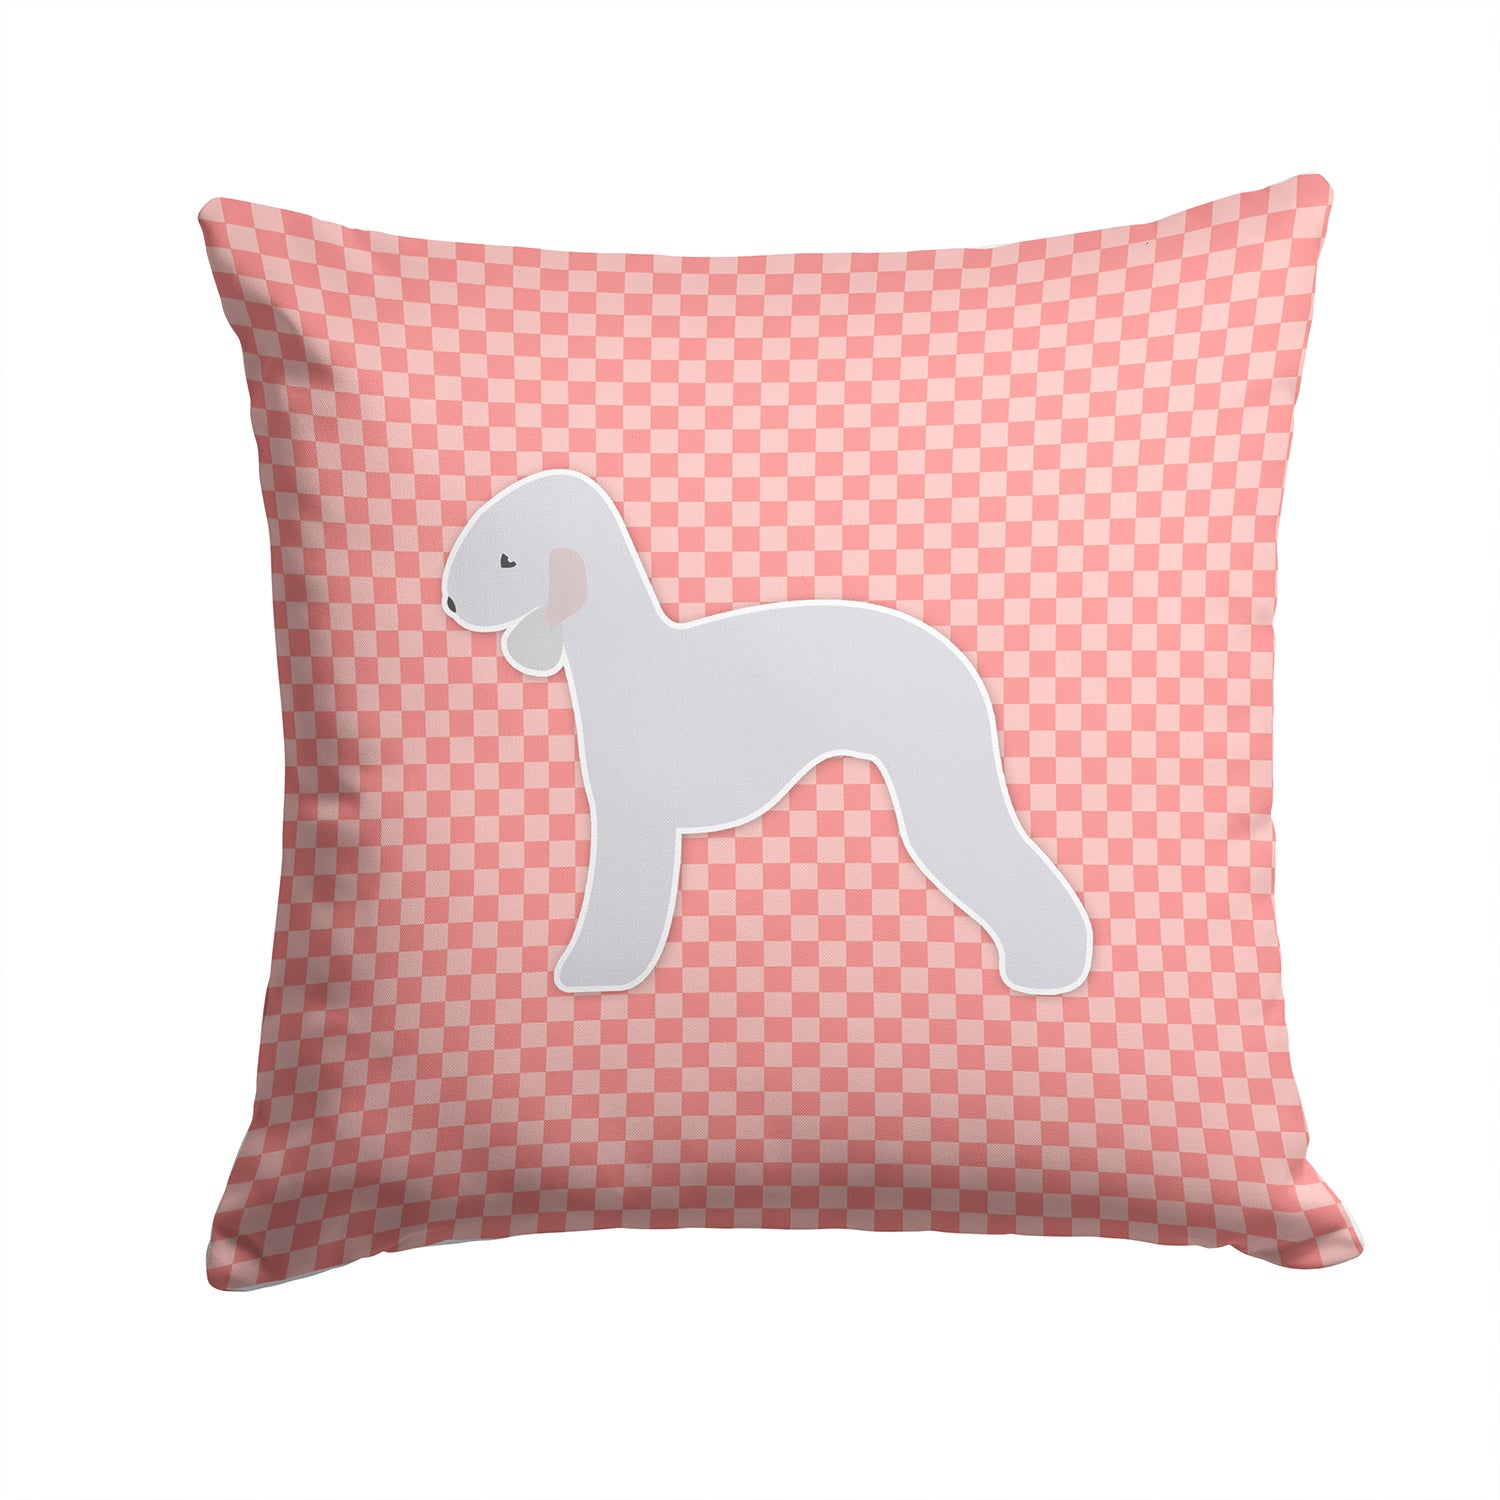 Bedlington Terrier Checkerboard Pink Fabric Decorative Pillow BB3594PW1414 - the-store.com